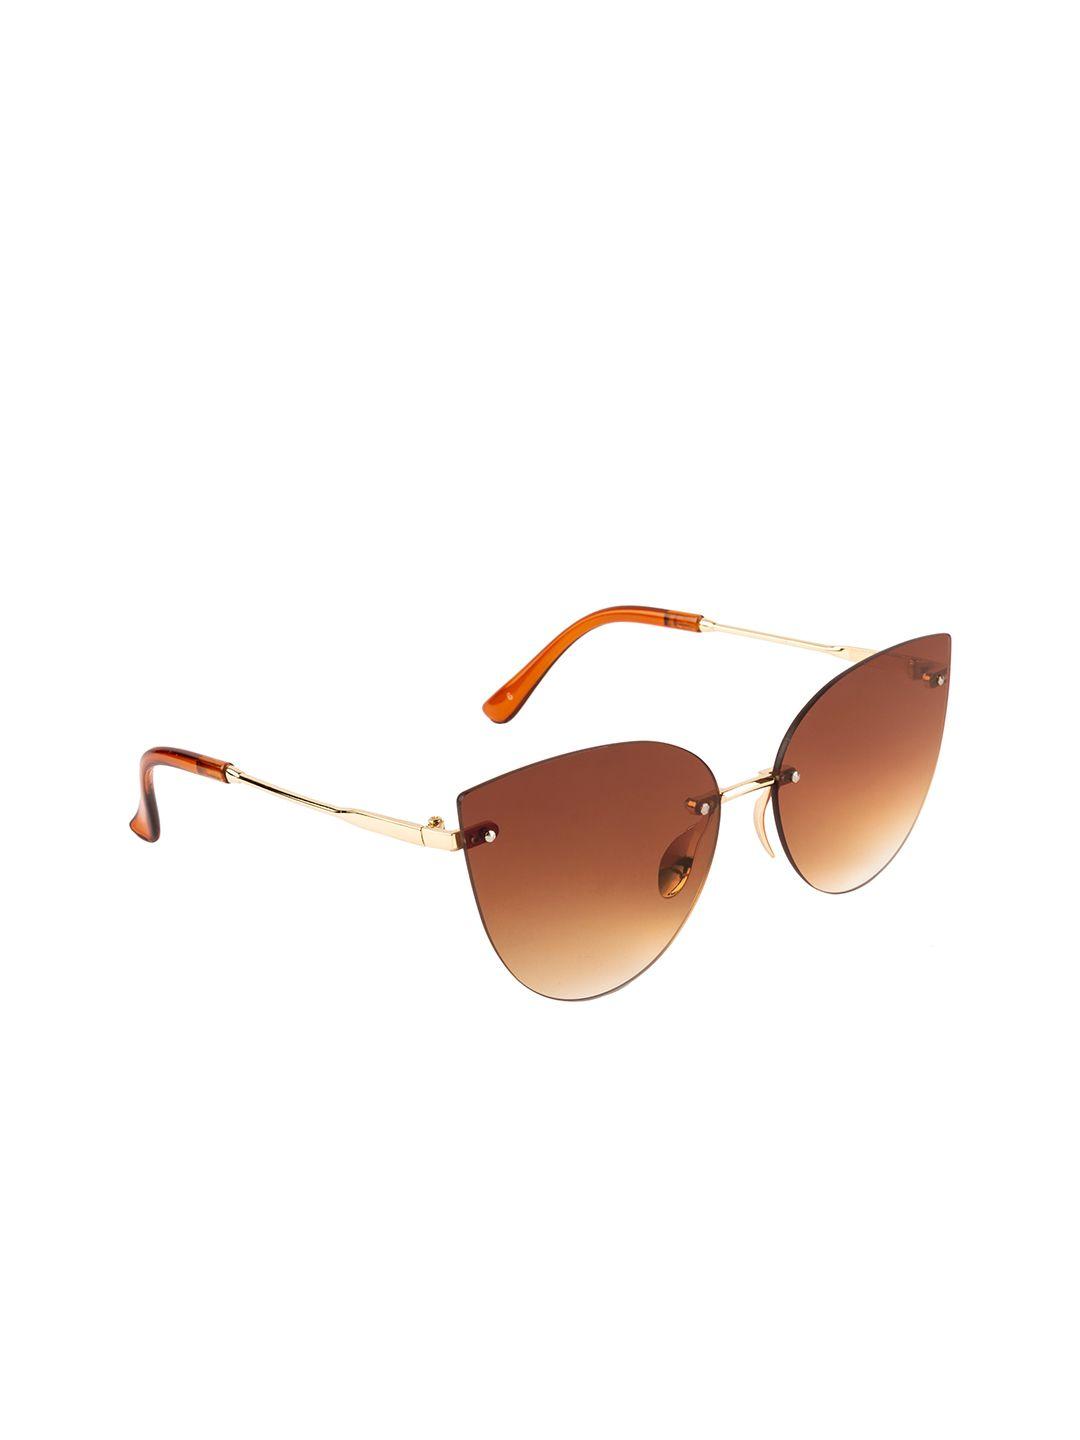 aislin women brown lens & gold-toned cateye sunglasses with uv protected lens